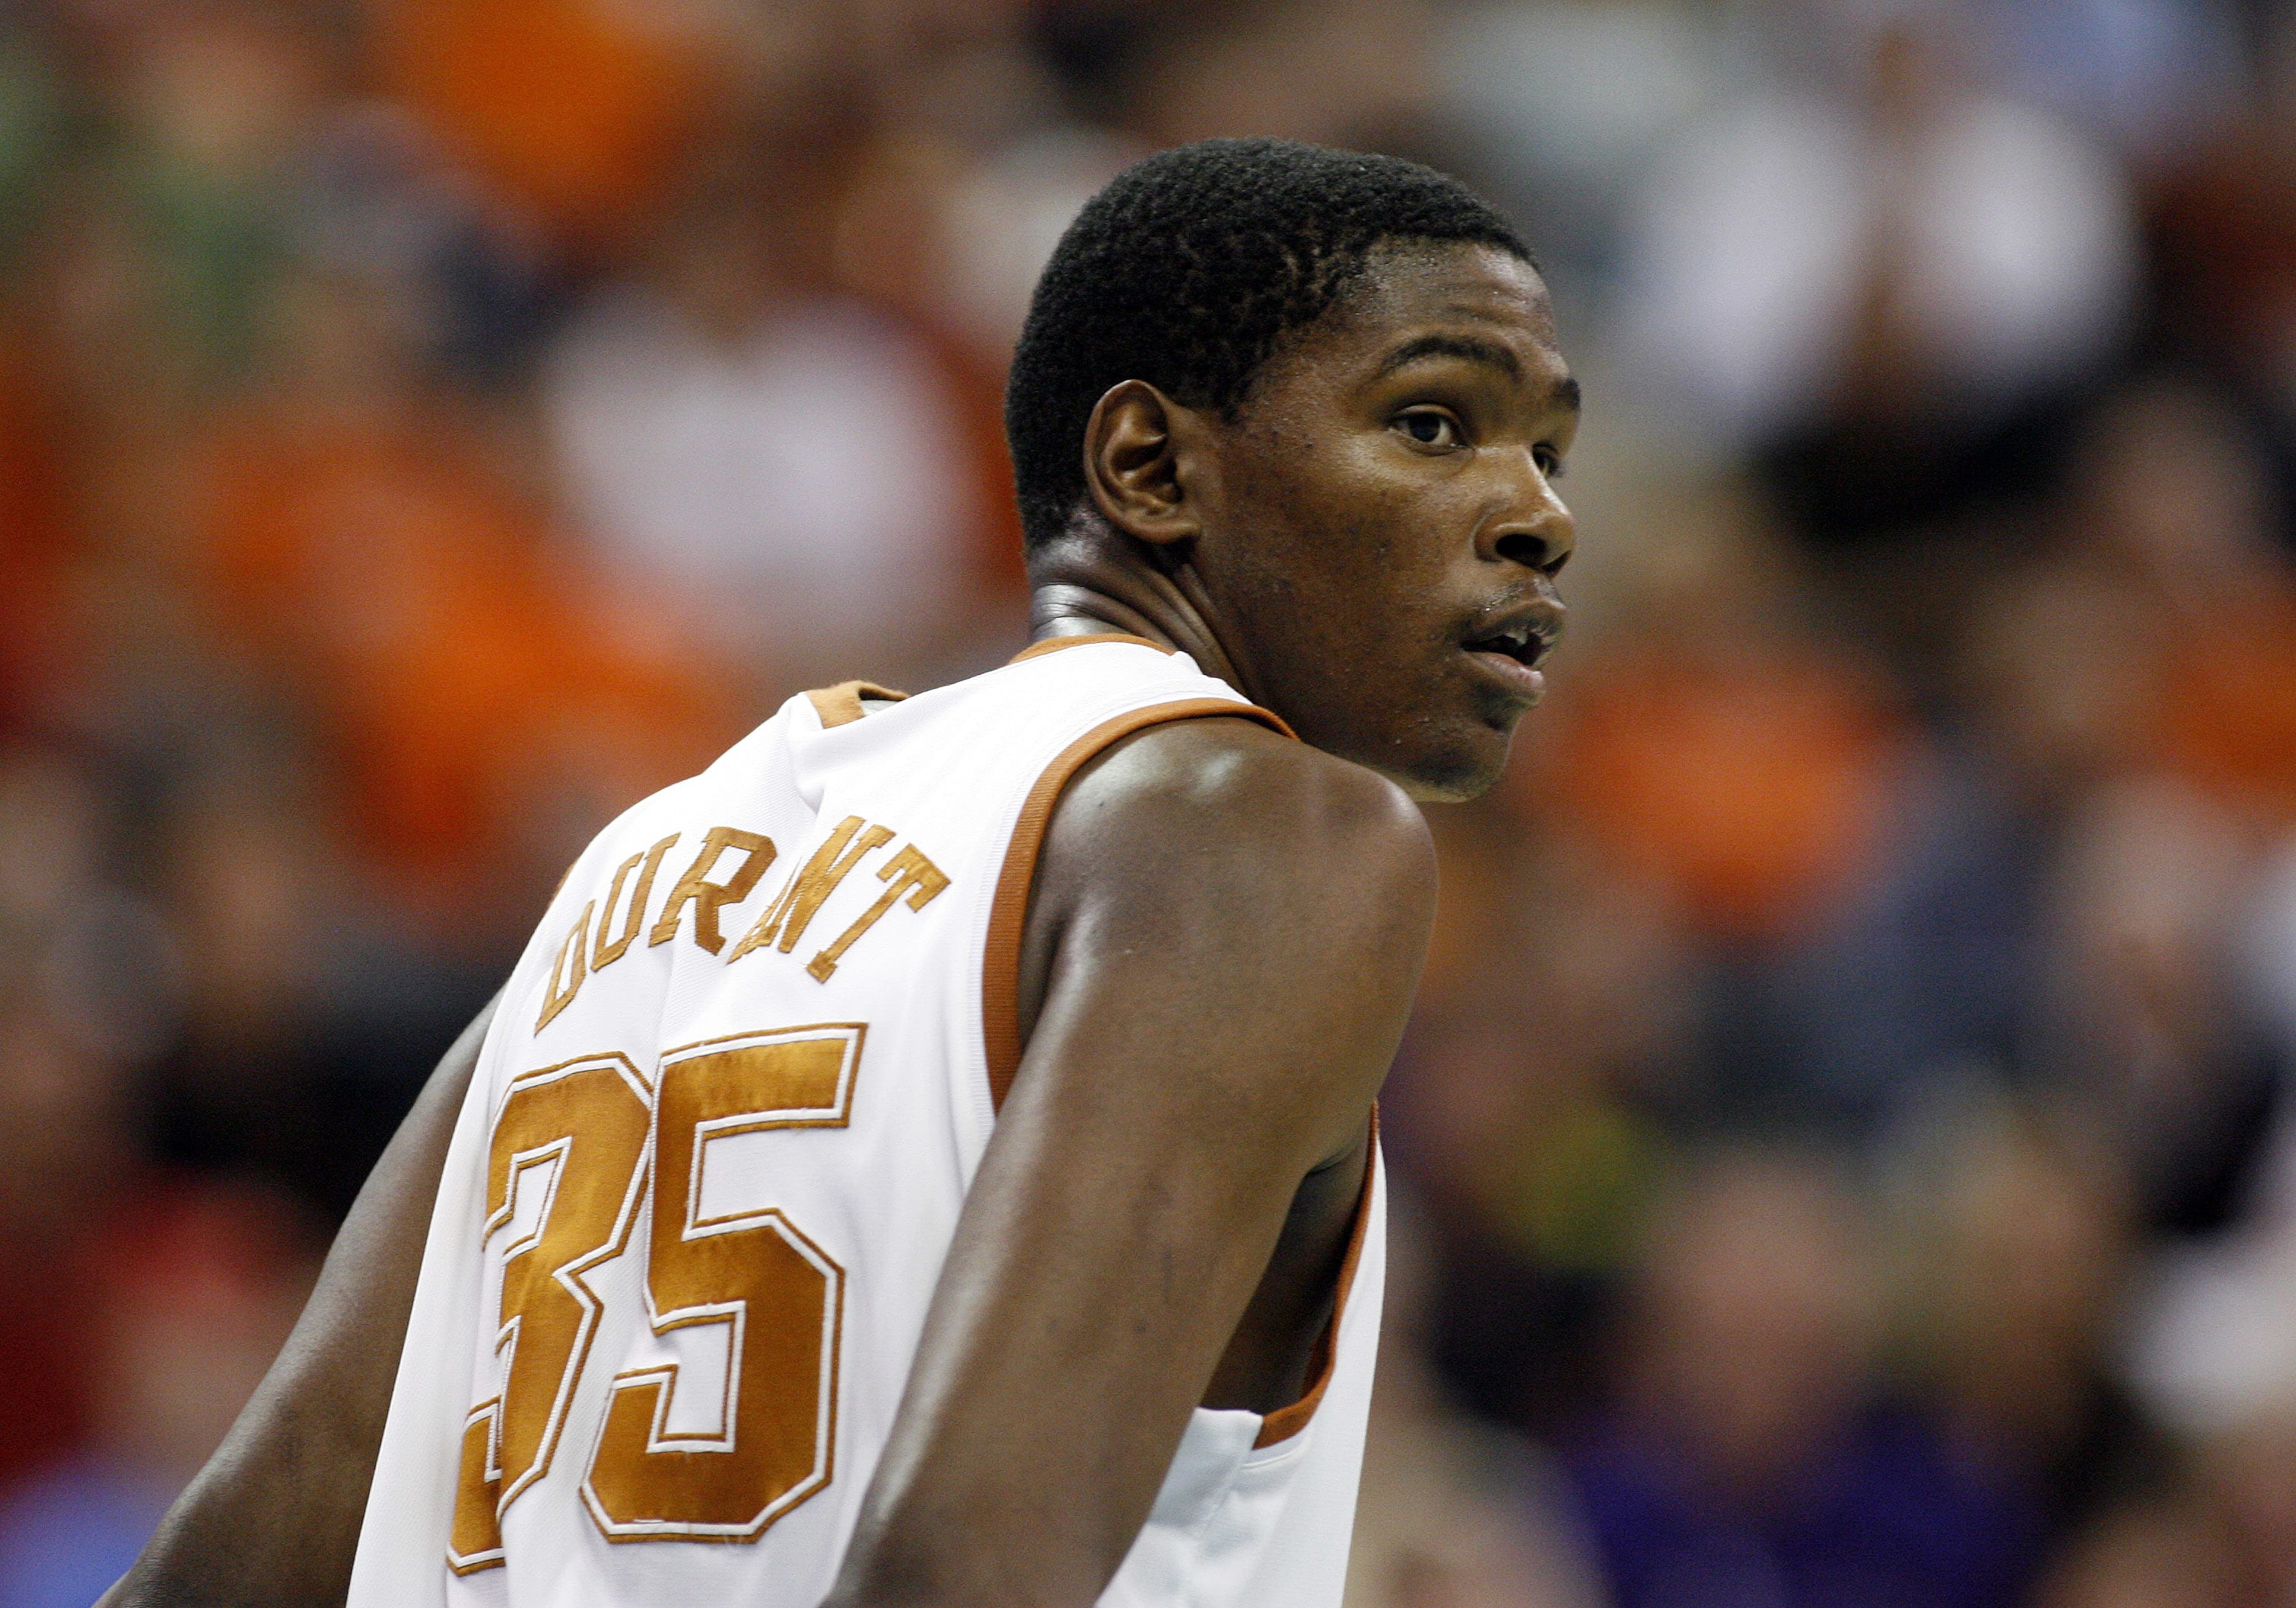 Kevin Durant plays in a game at Texas.